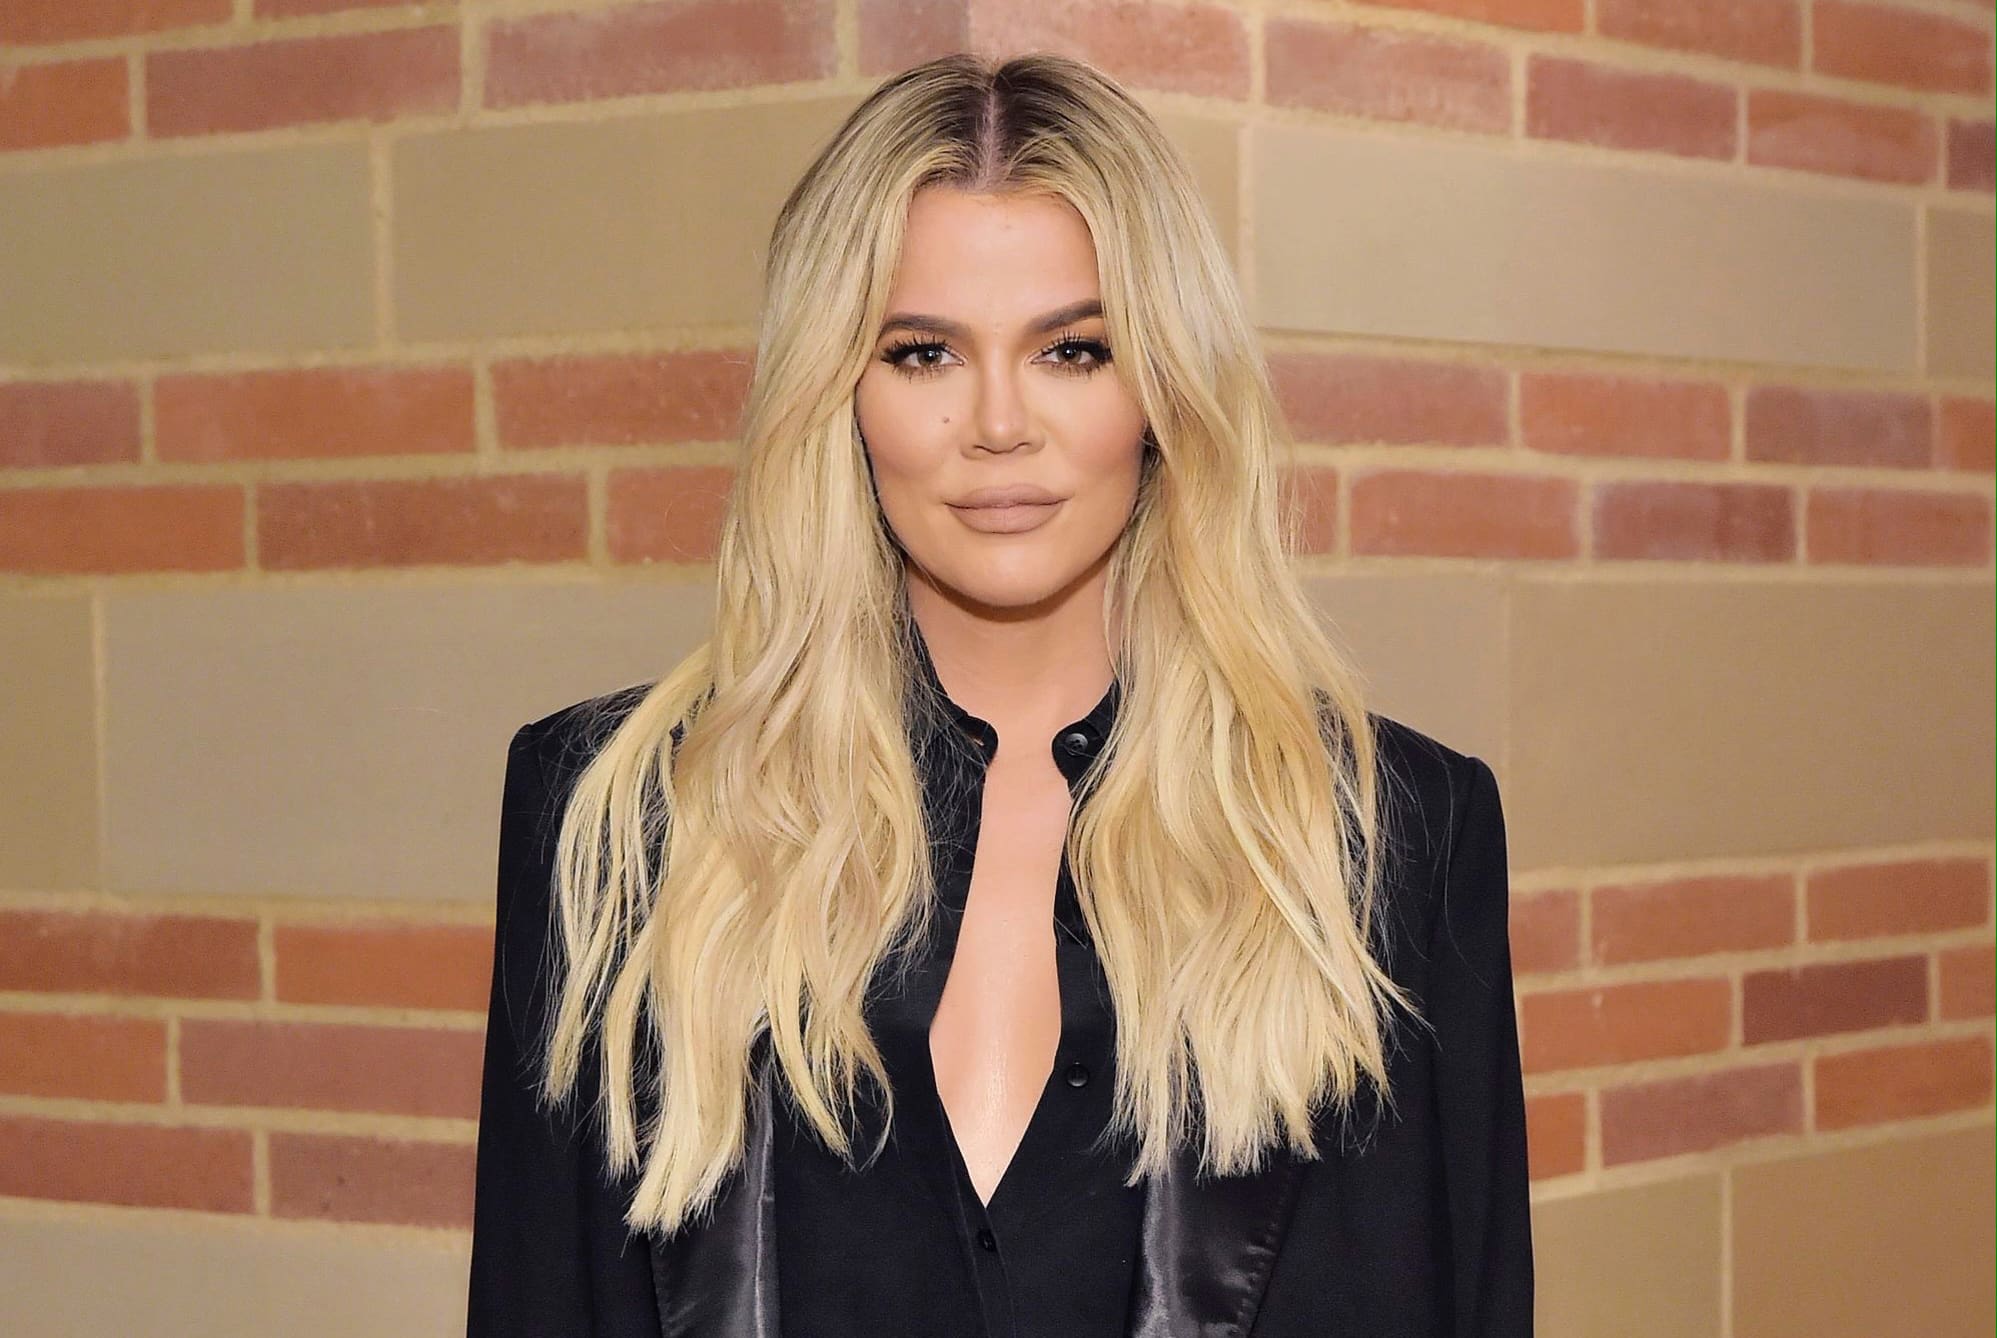 ”khloe-kardashian-tests-positive-for-covid-see-her-message-to-fans”